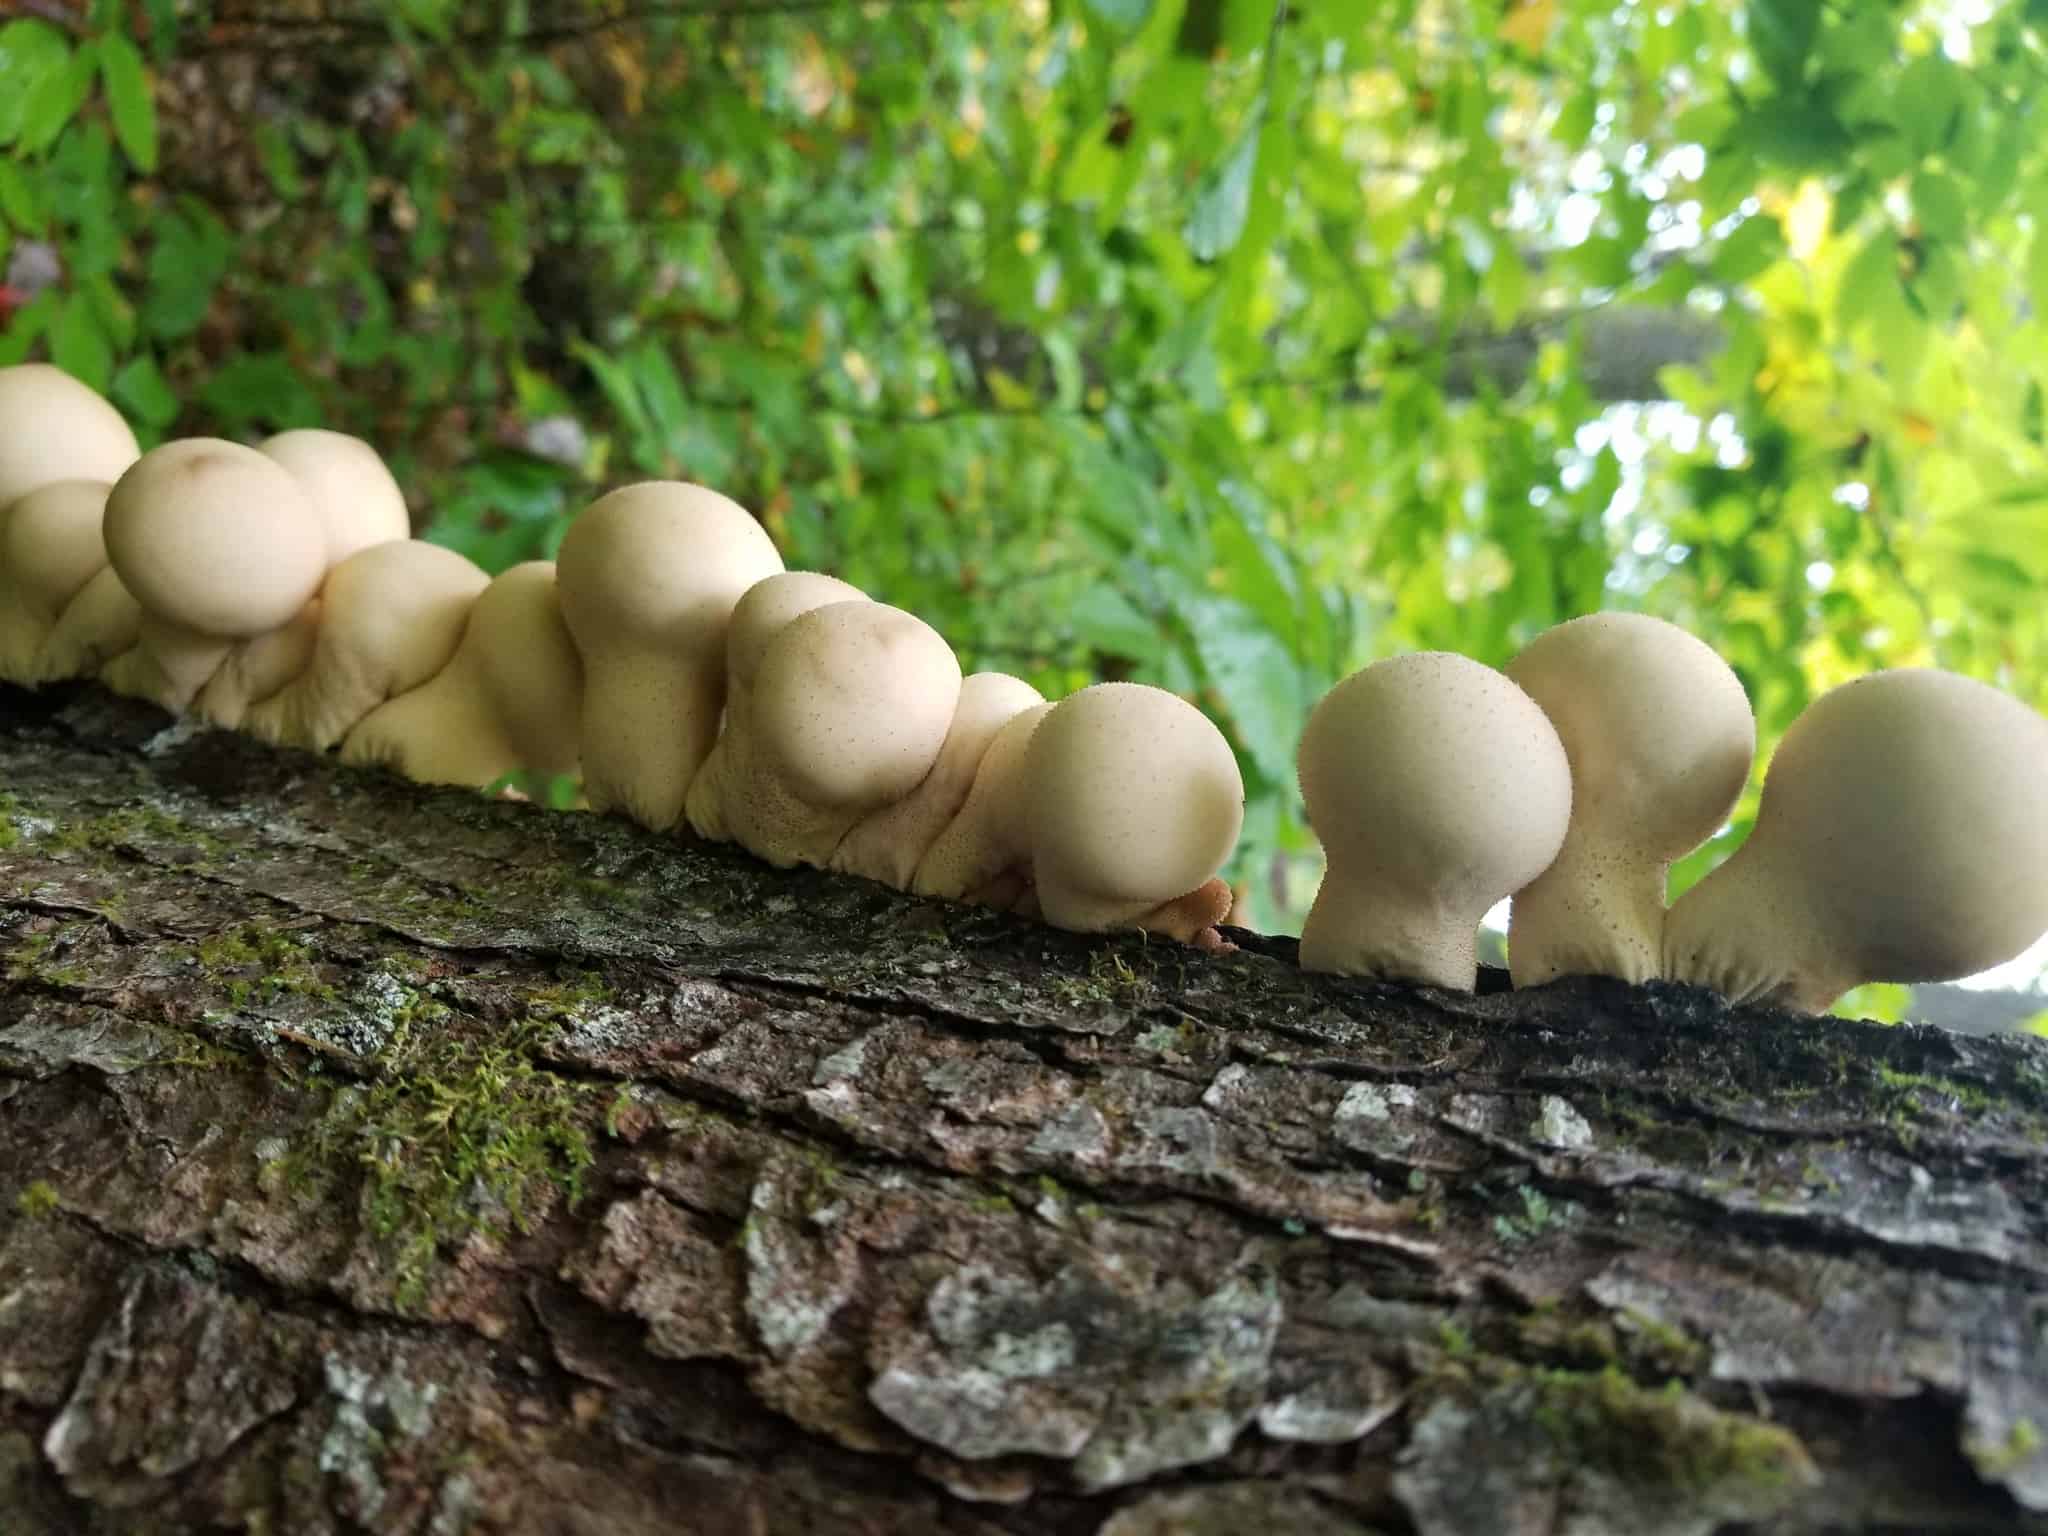 Line of white round mushrooms on a tree